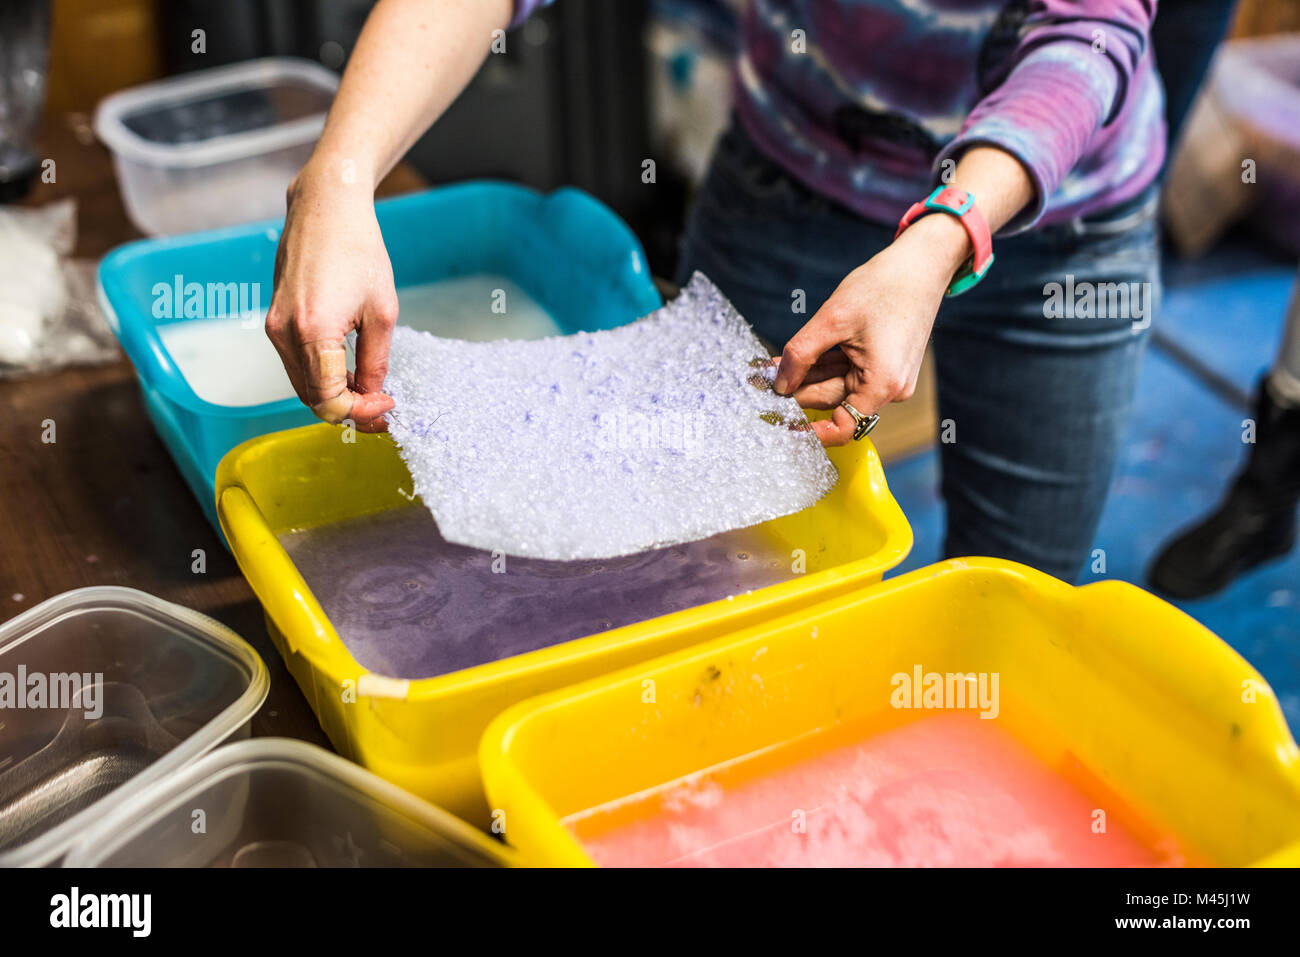 Paper making workshop in classroom. Stock Photo